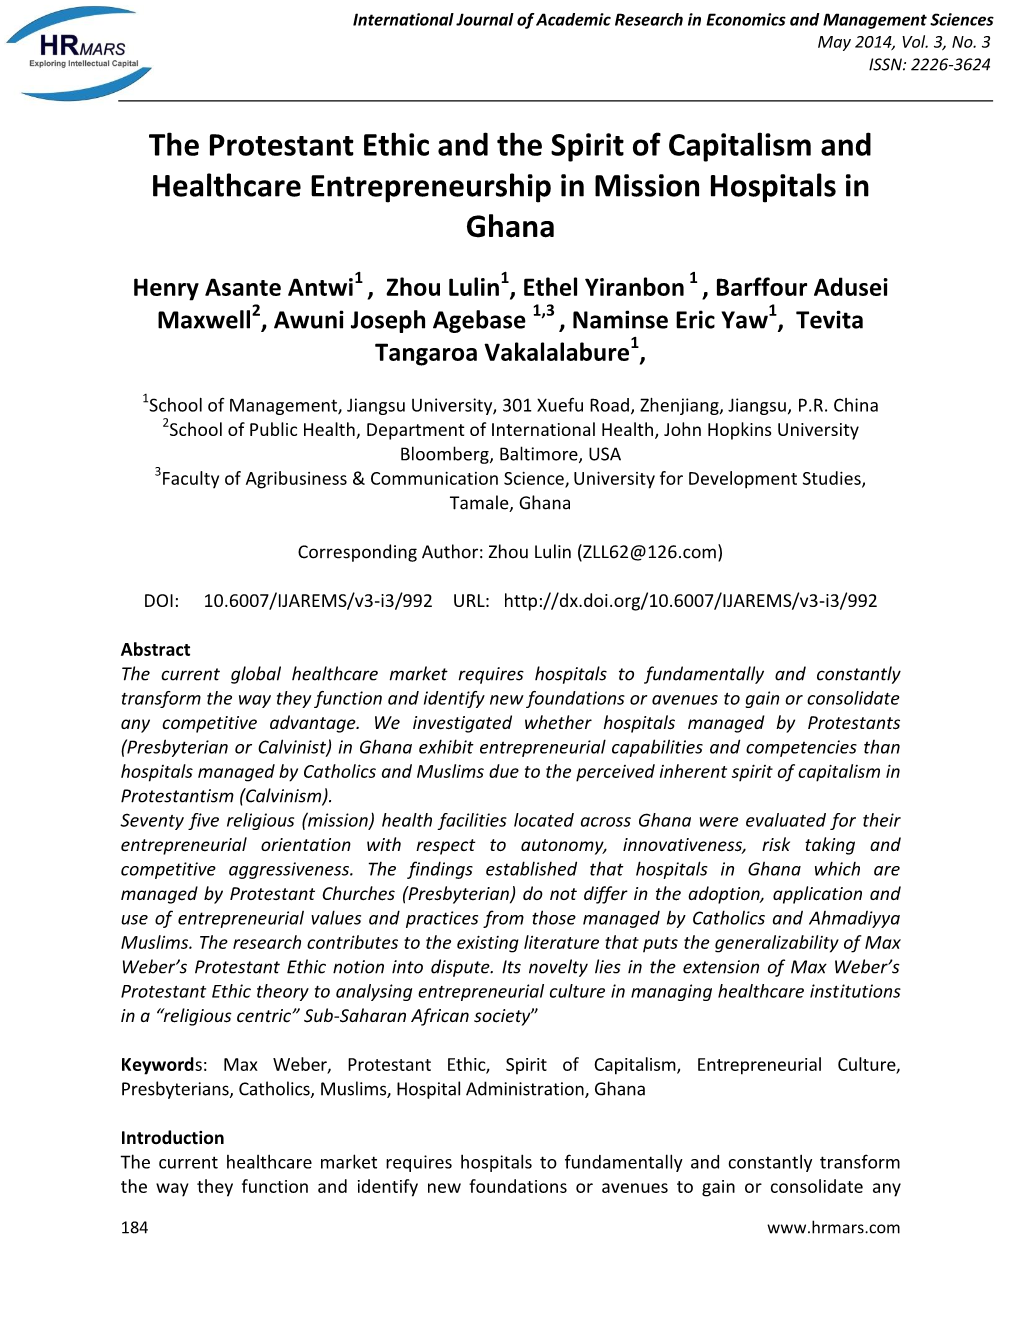 The Protestant Ethic and the Spirit of Capitalism and Healthcare Entrepreneurship in Mission Hospitals in Ghana